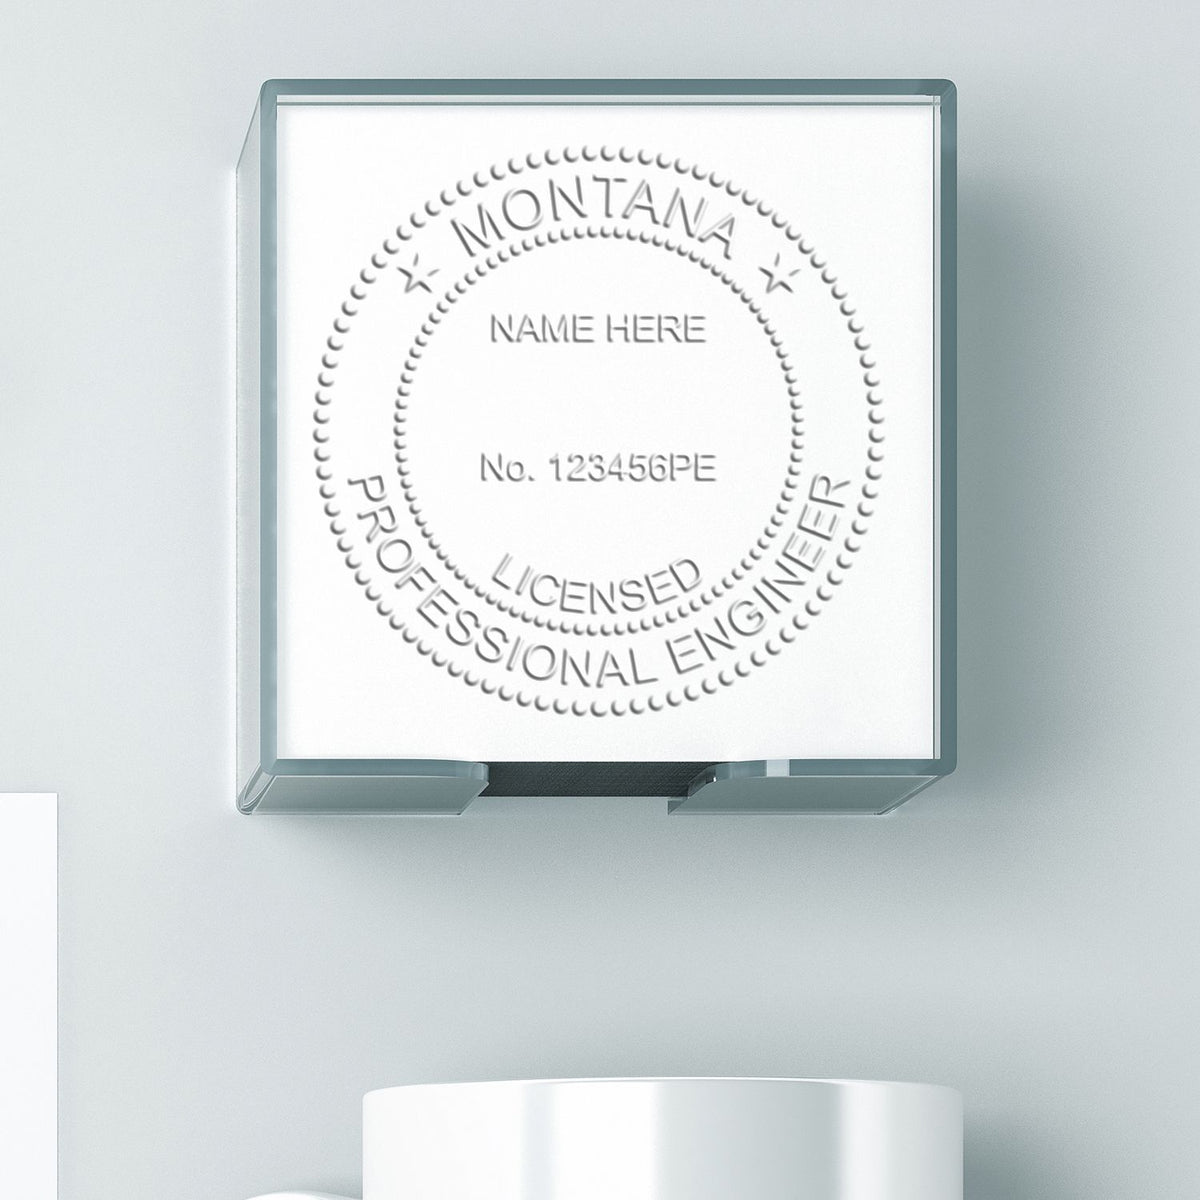 This paper is stamped with a sample imprint of the Montana Engineer Desk Seal, signifying its quality and reliability.